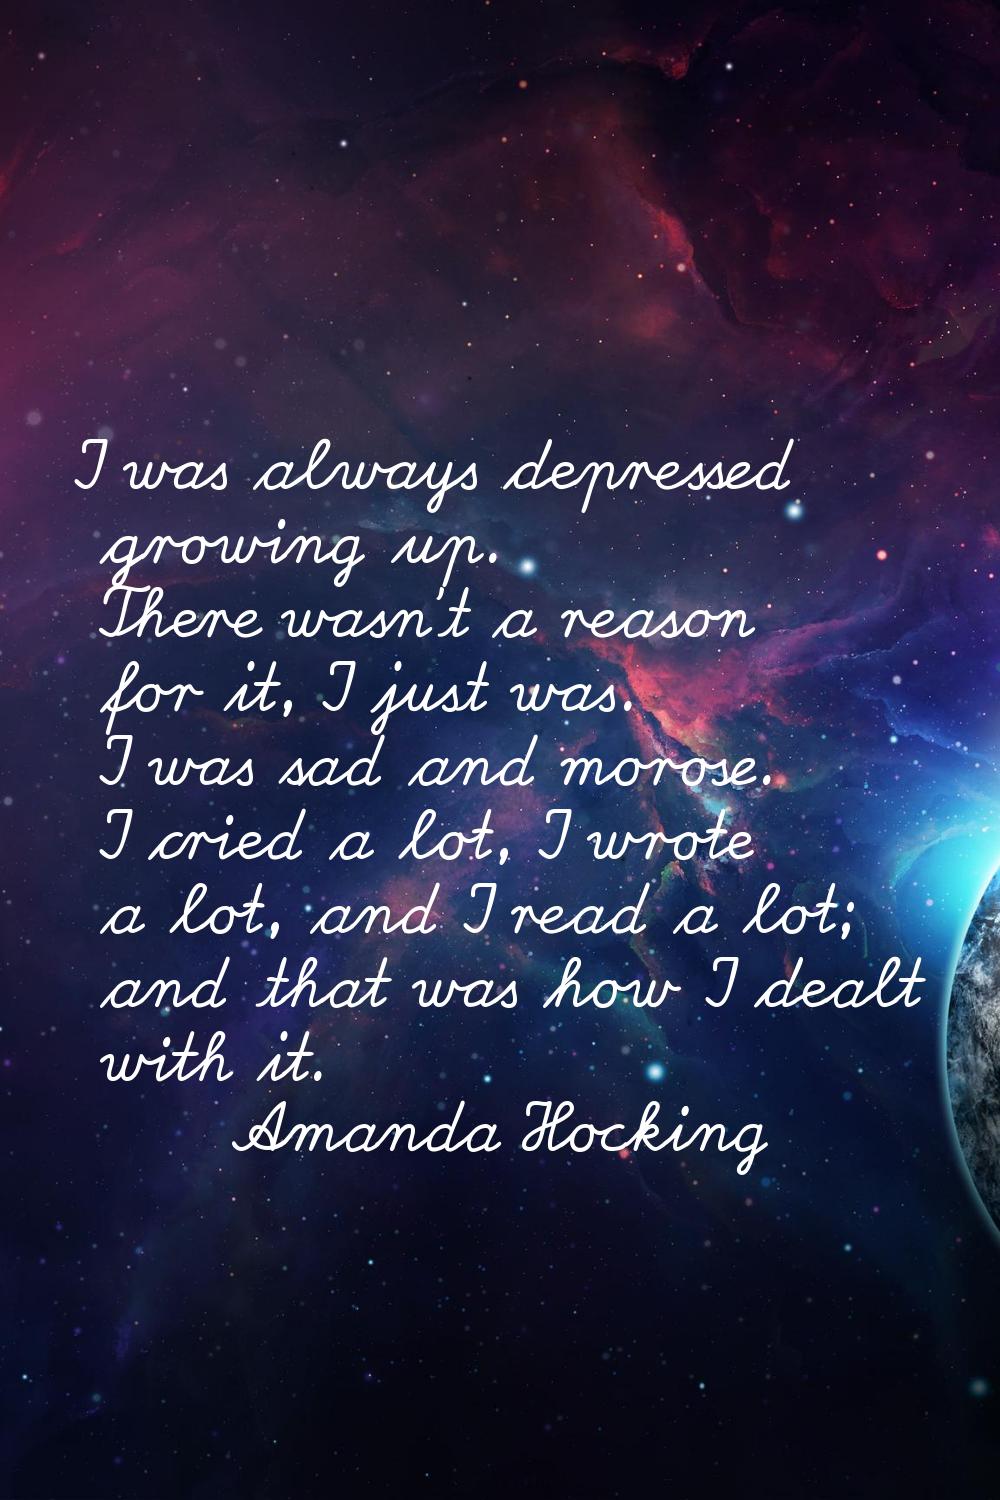 I was always depressed growing up. There wasn't a reason for it, I just was. I was sad and morose. 